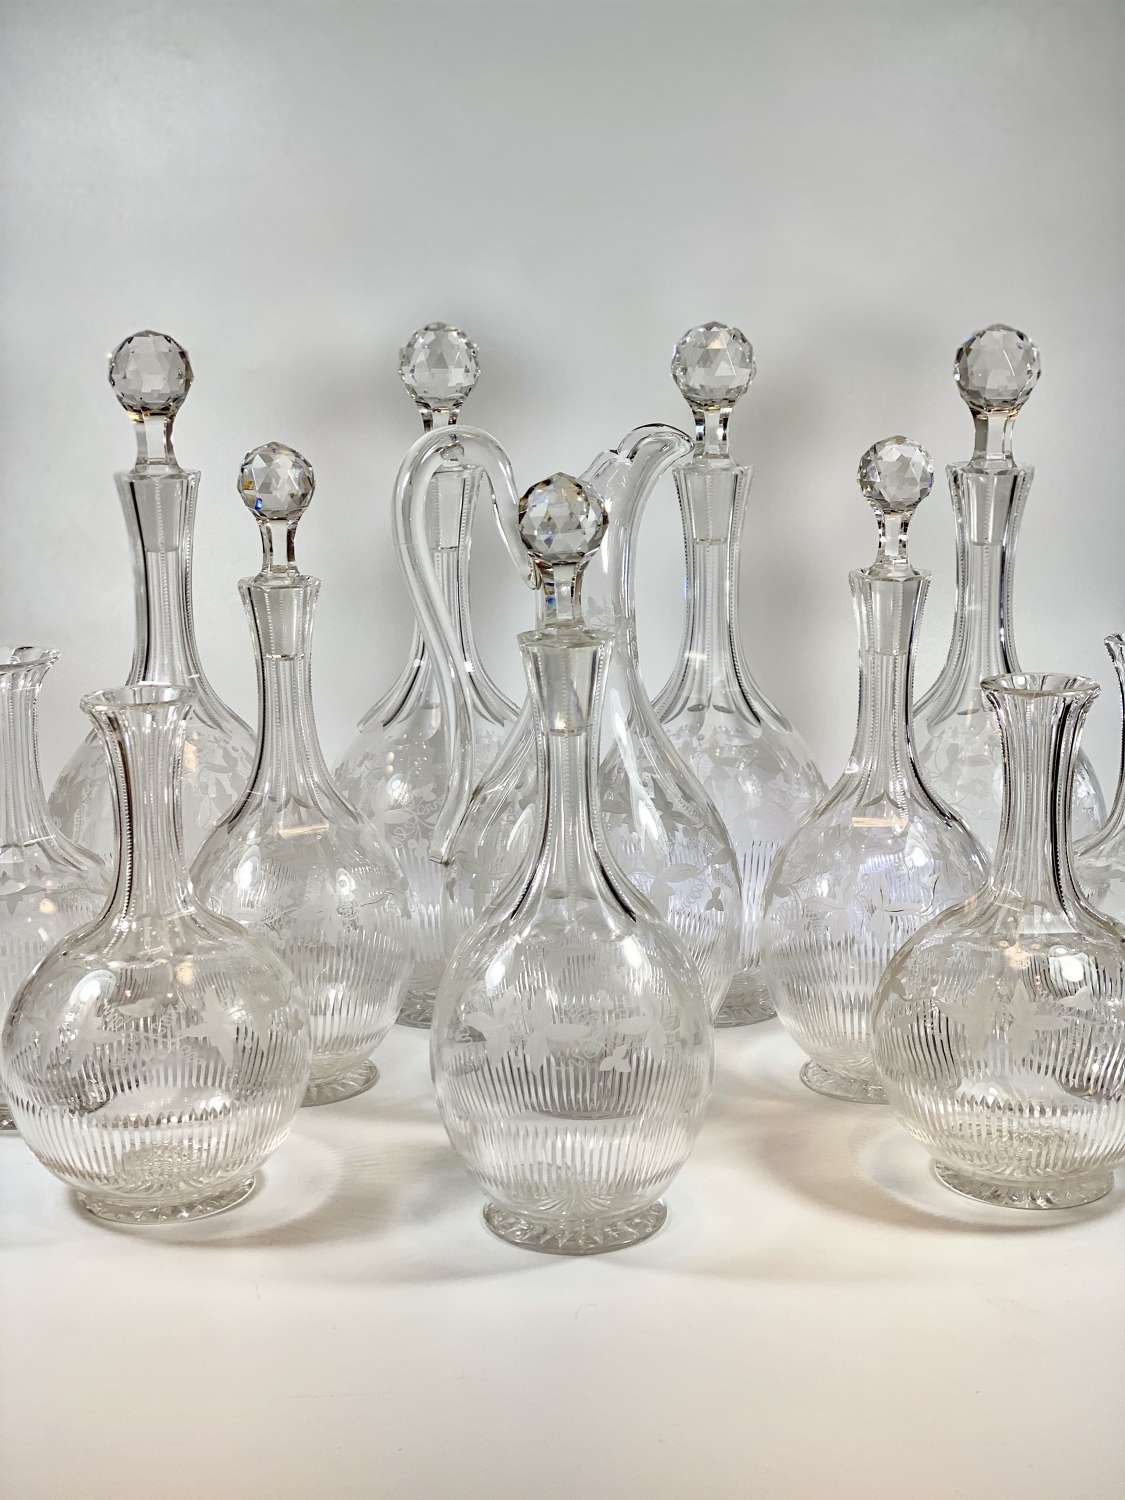 Rare suite of 12 Victorian vine etched crystal decanters